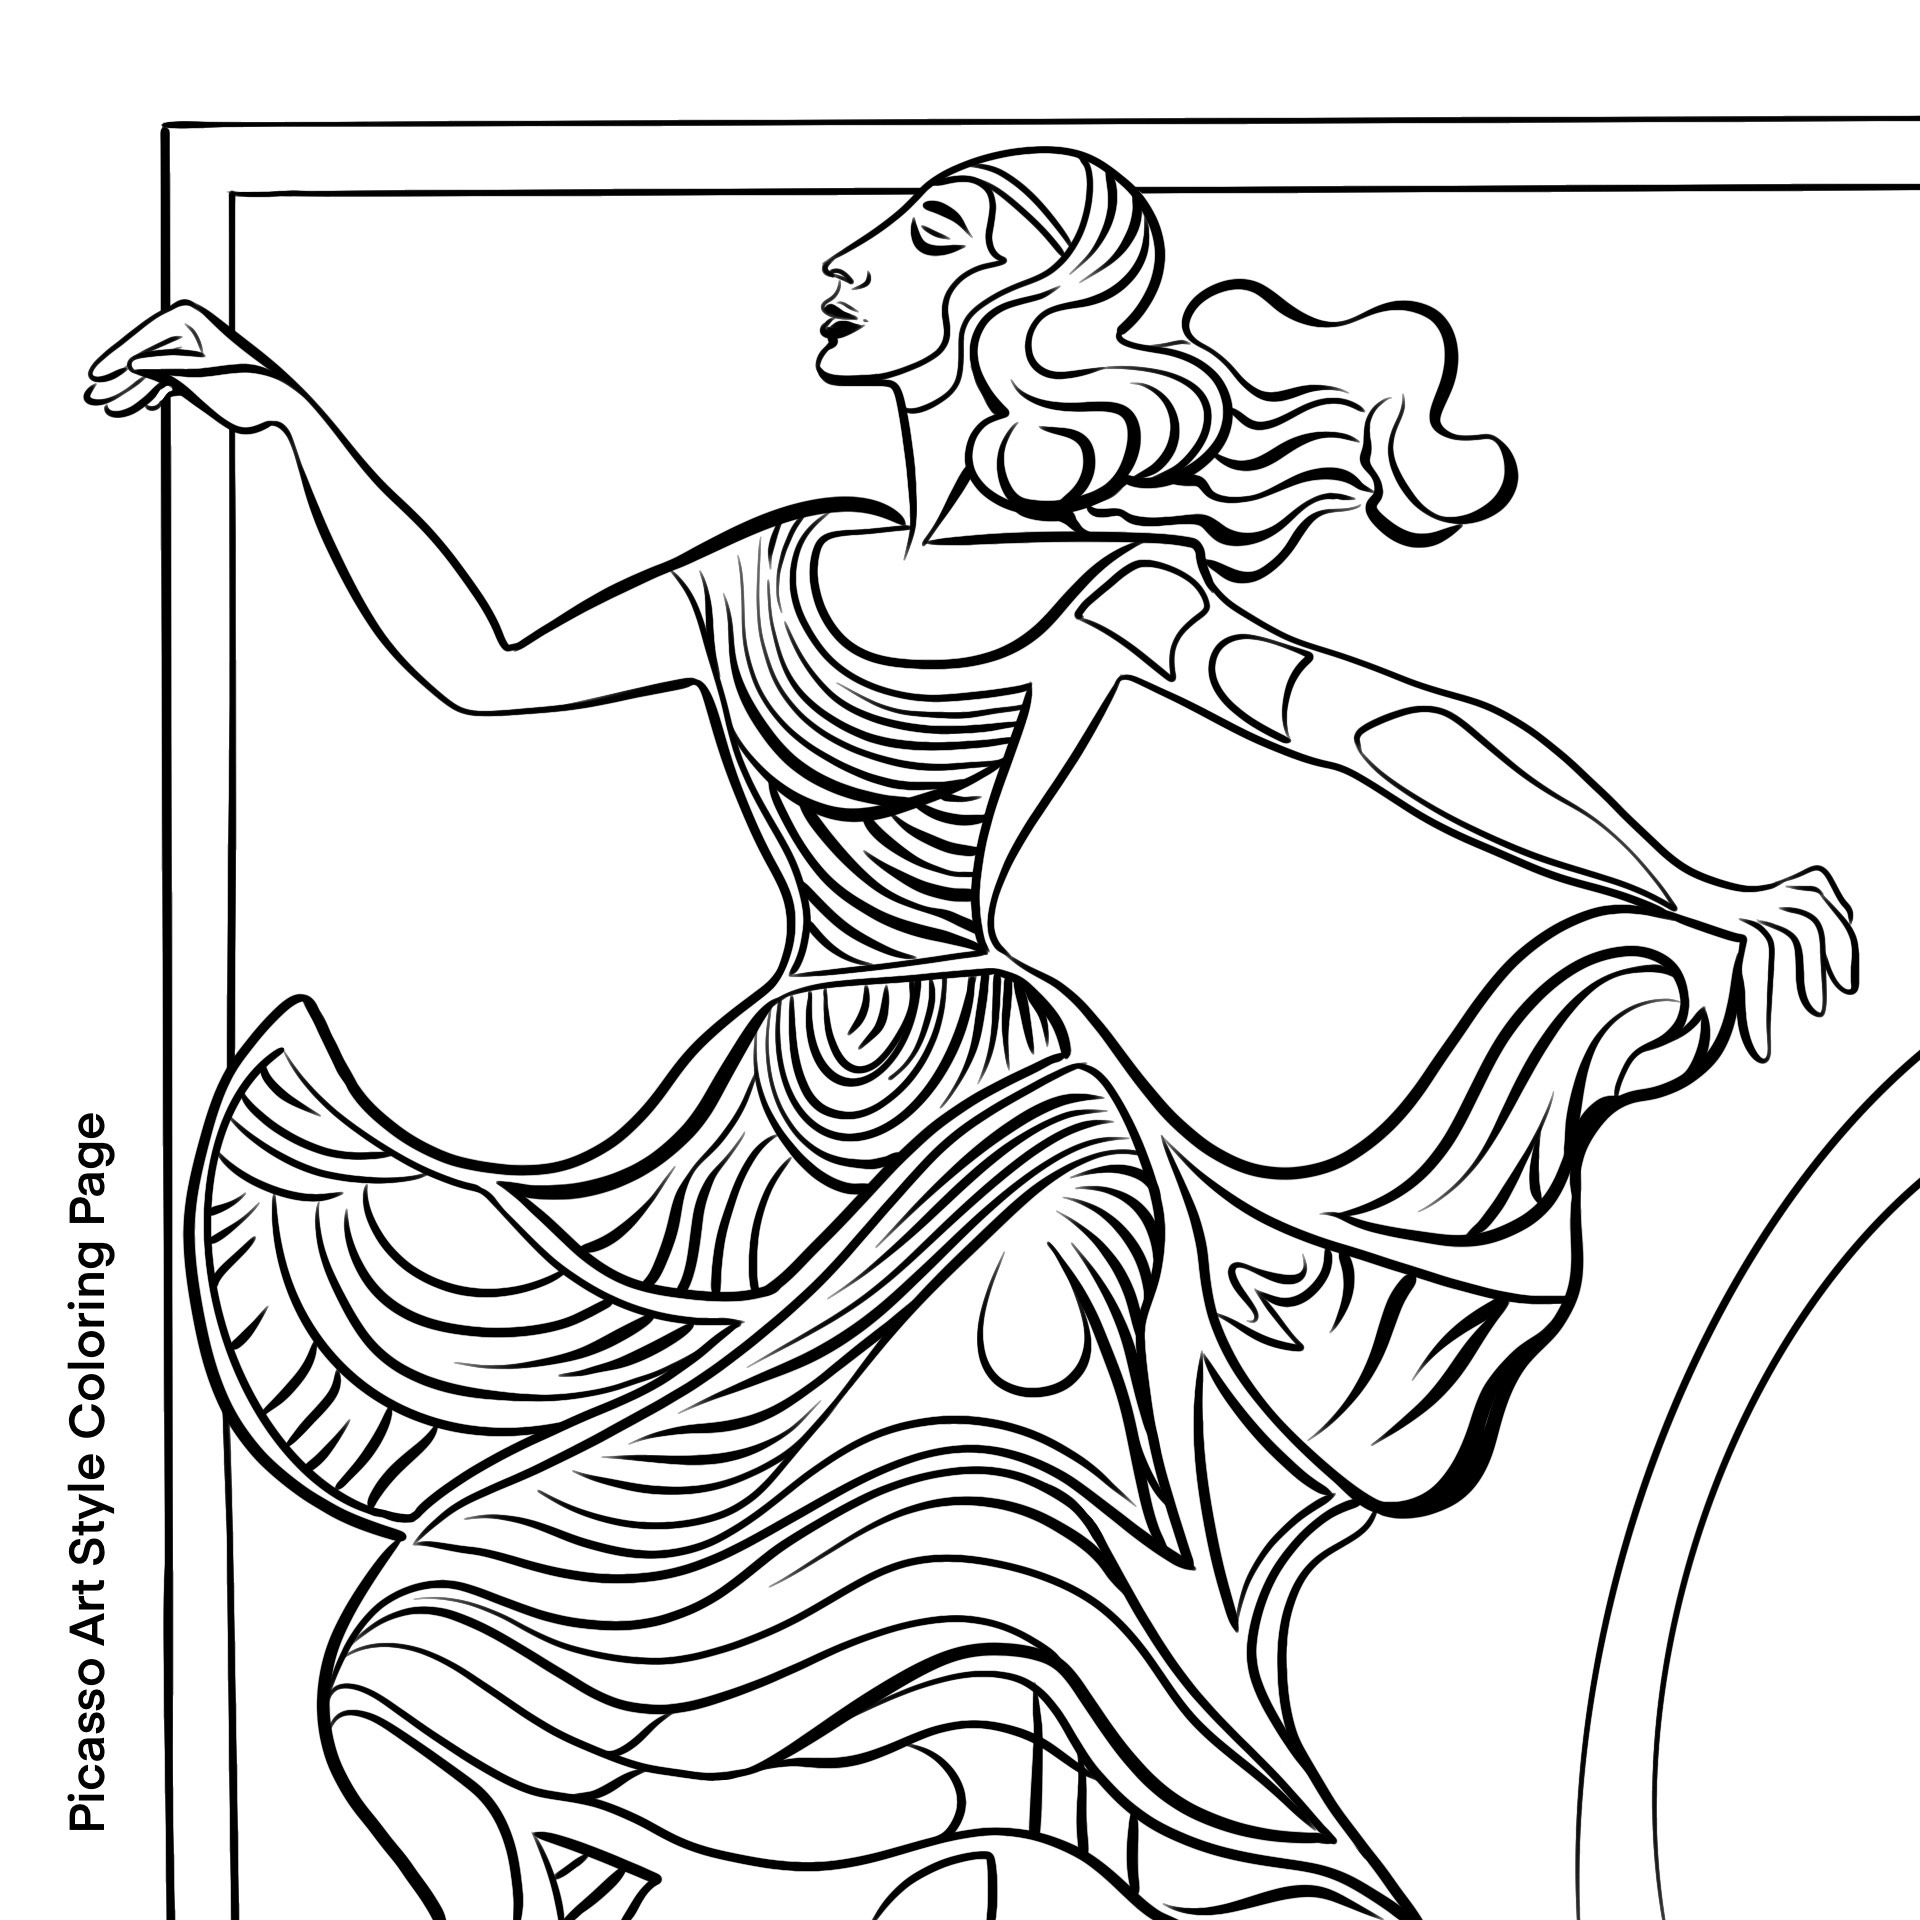 pablo picasso paintings coloring pages - photo #34